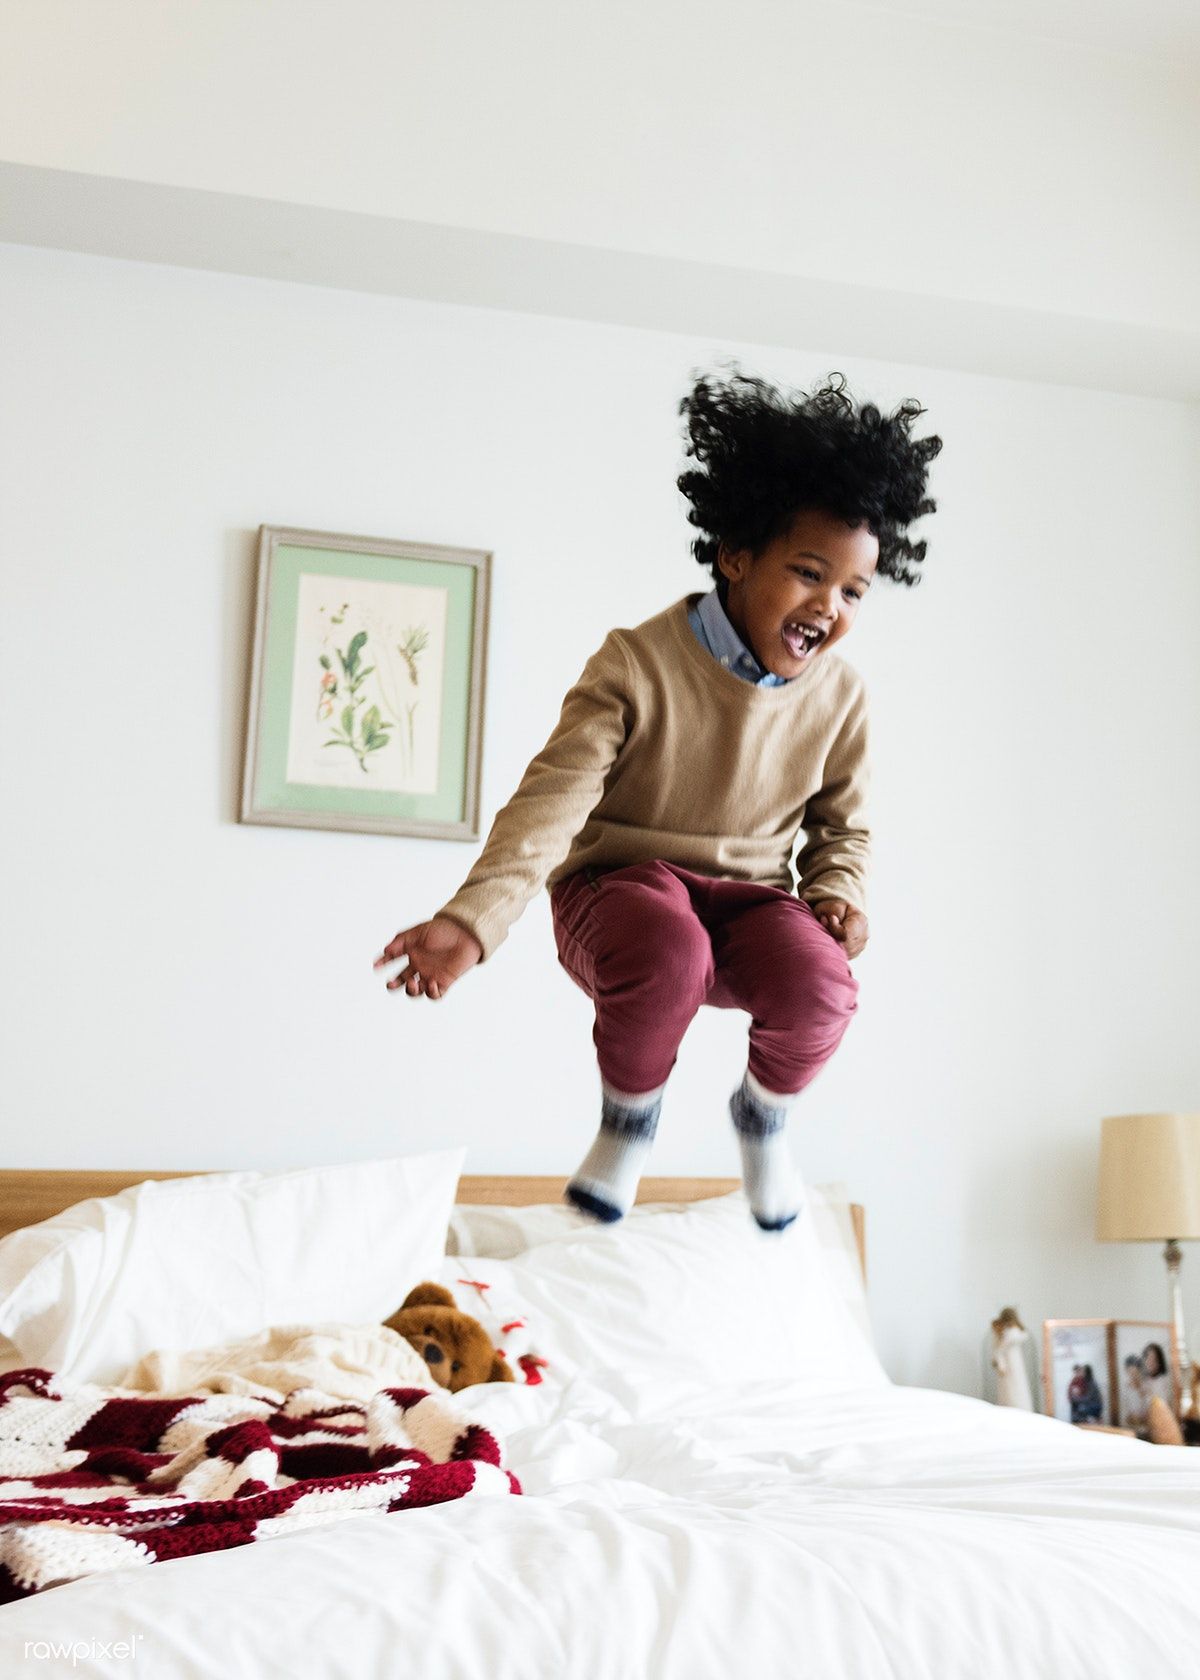 Soaring into the School Year Right! Create a Bedroom Your Kids Will Love